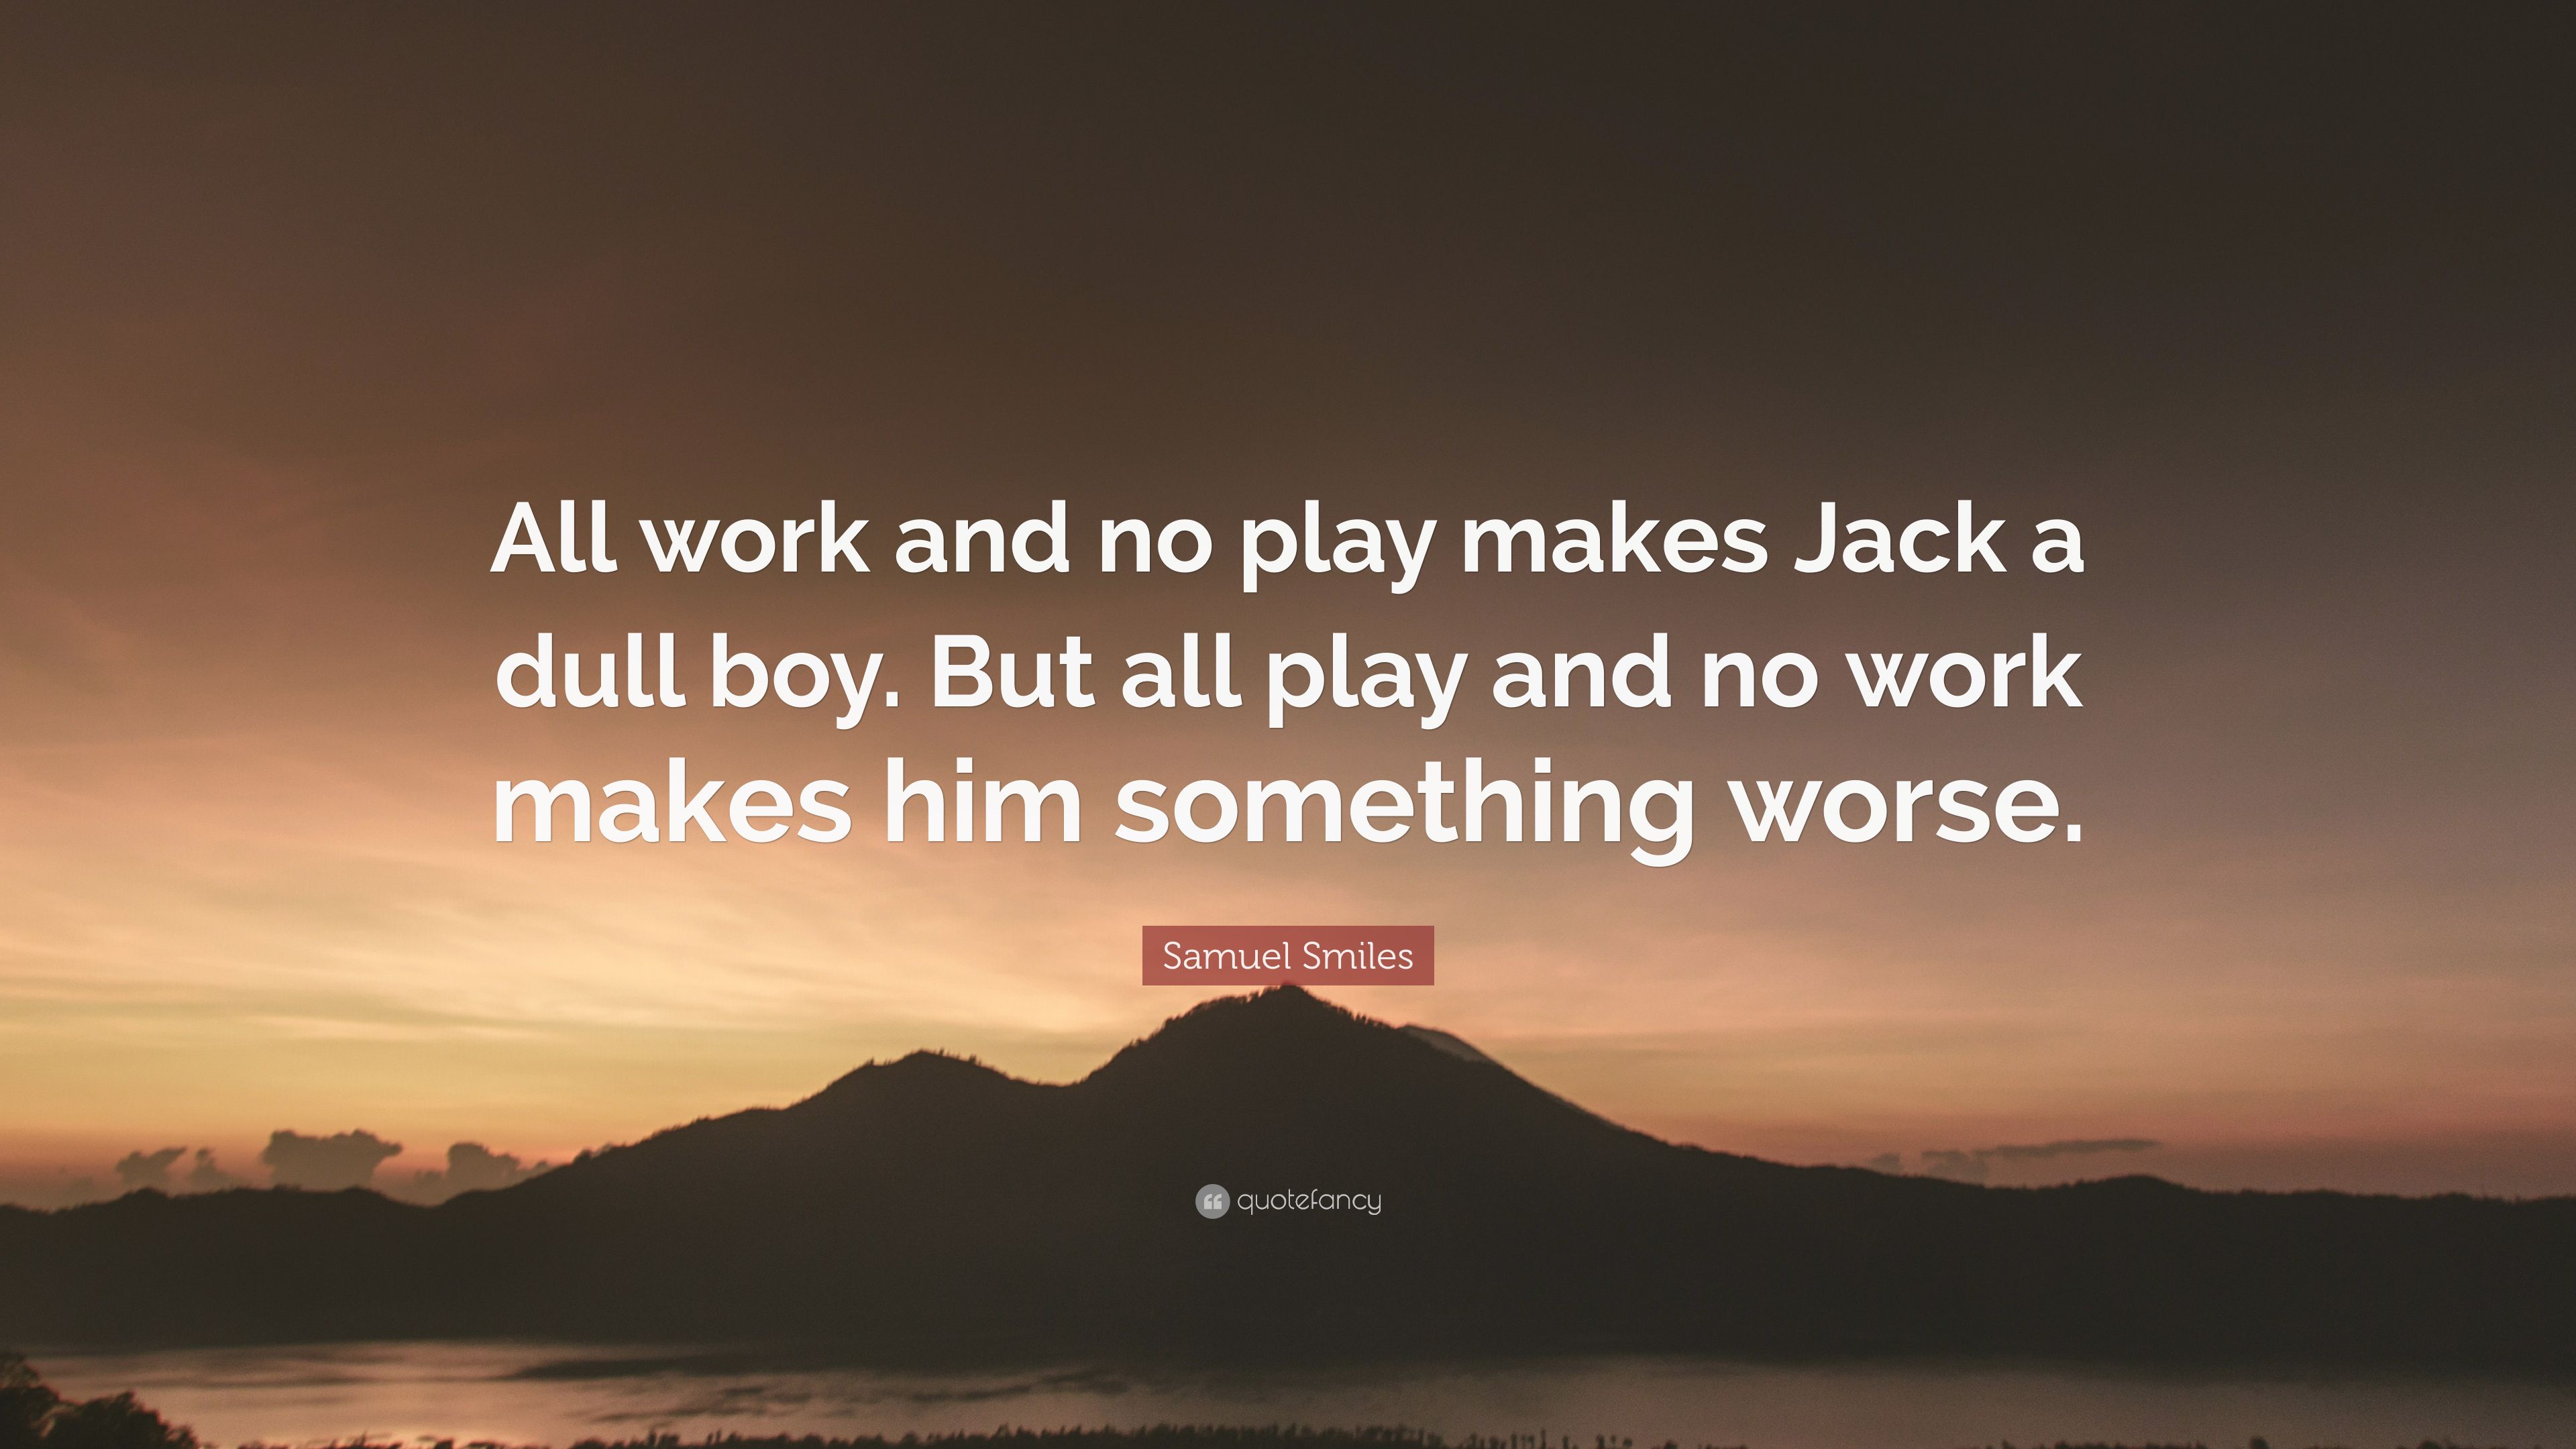 Samuel Smiles Quote: “All work and no play makes Jack a dull boy